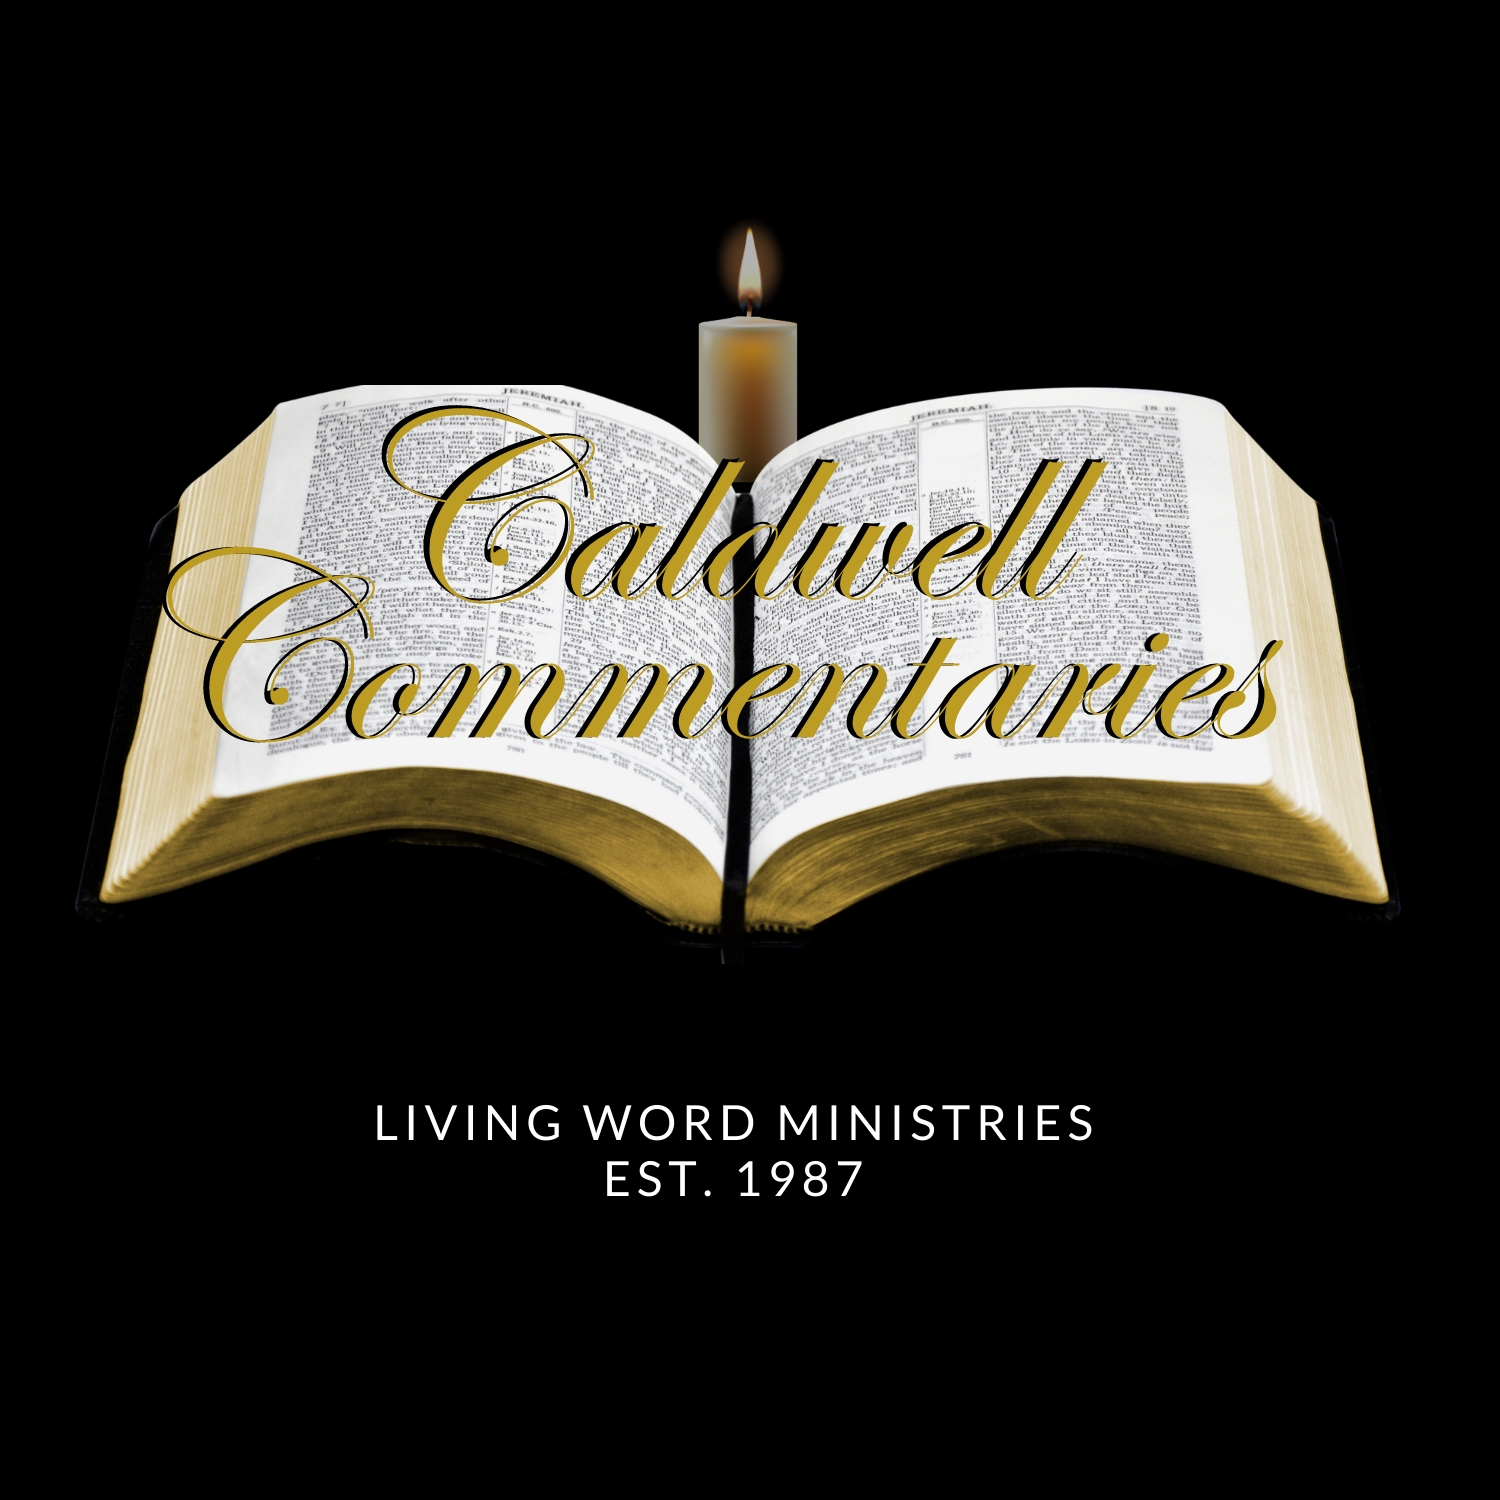 The Caldwell Commentaries Podcast podcast show image